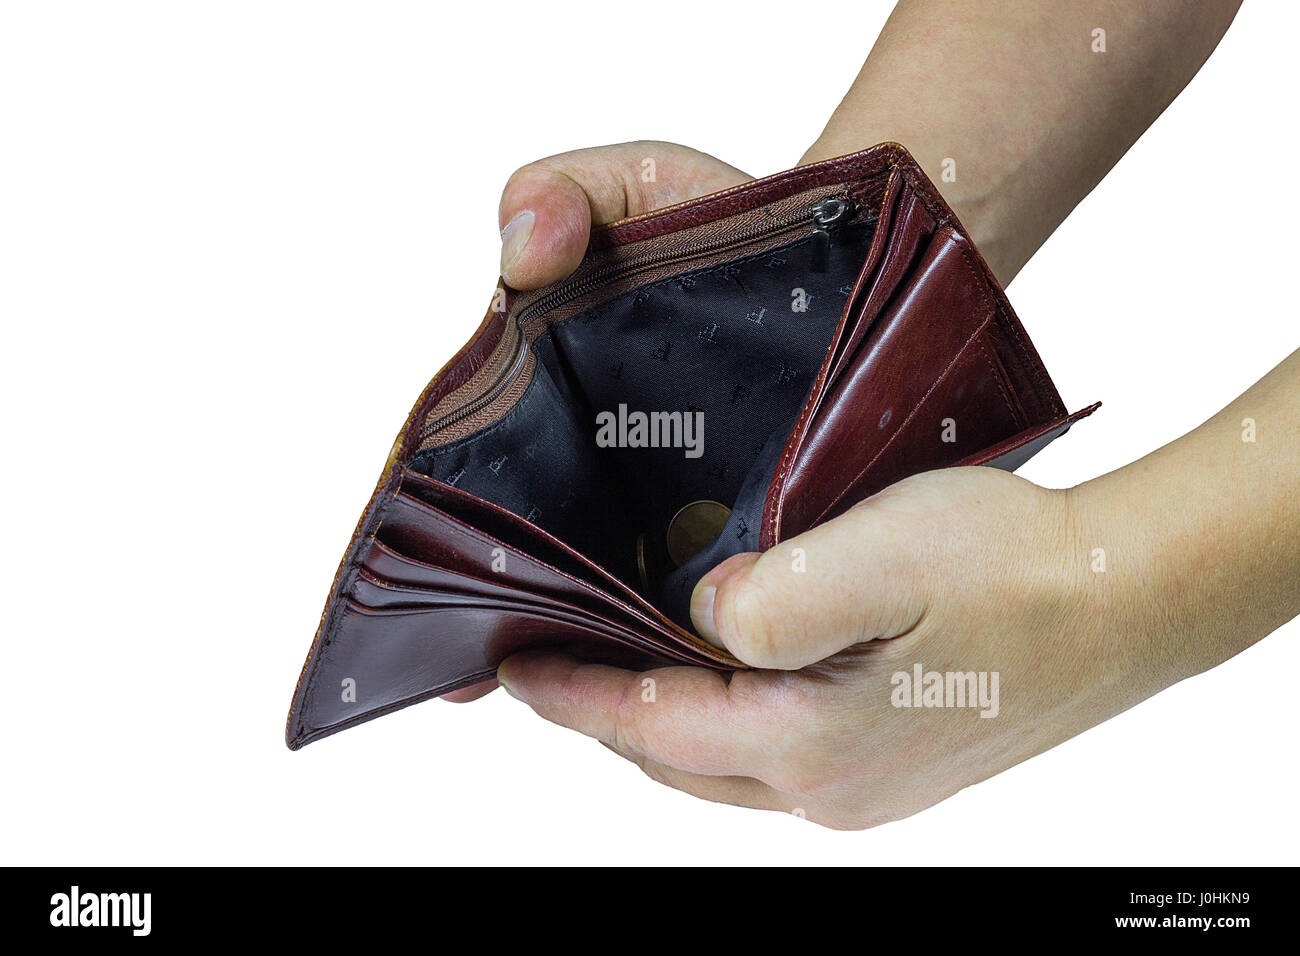 Empty Purse With Coin In Hand On The White Background Stock Photo, Picture  and Royalty Free Image. Image 5821736.